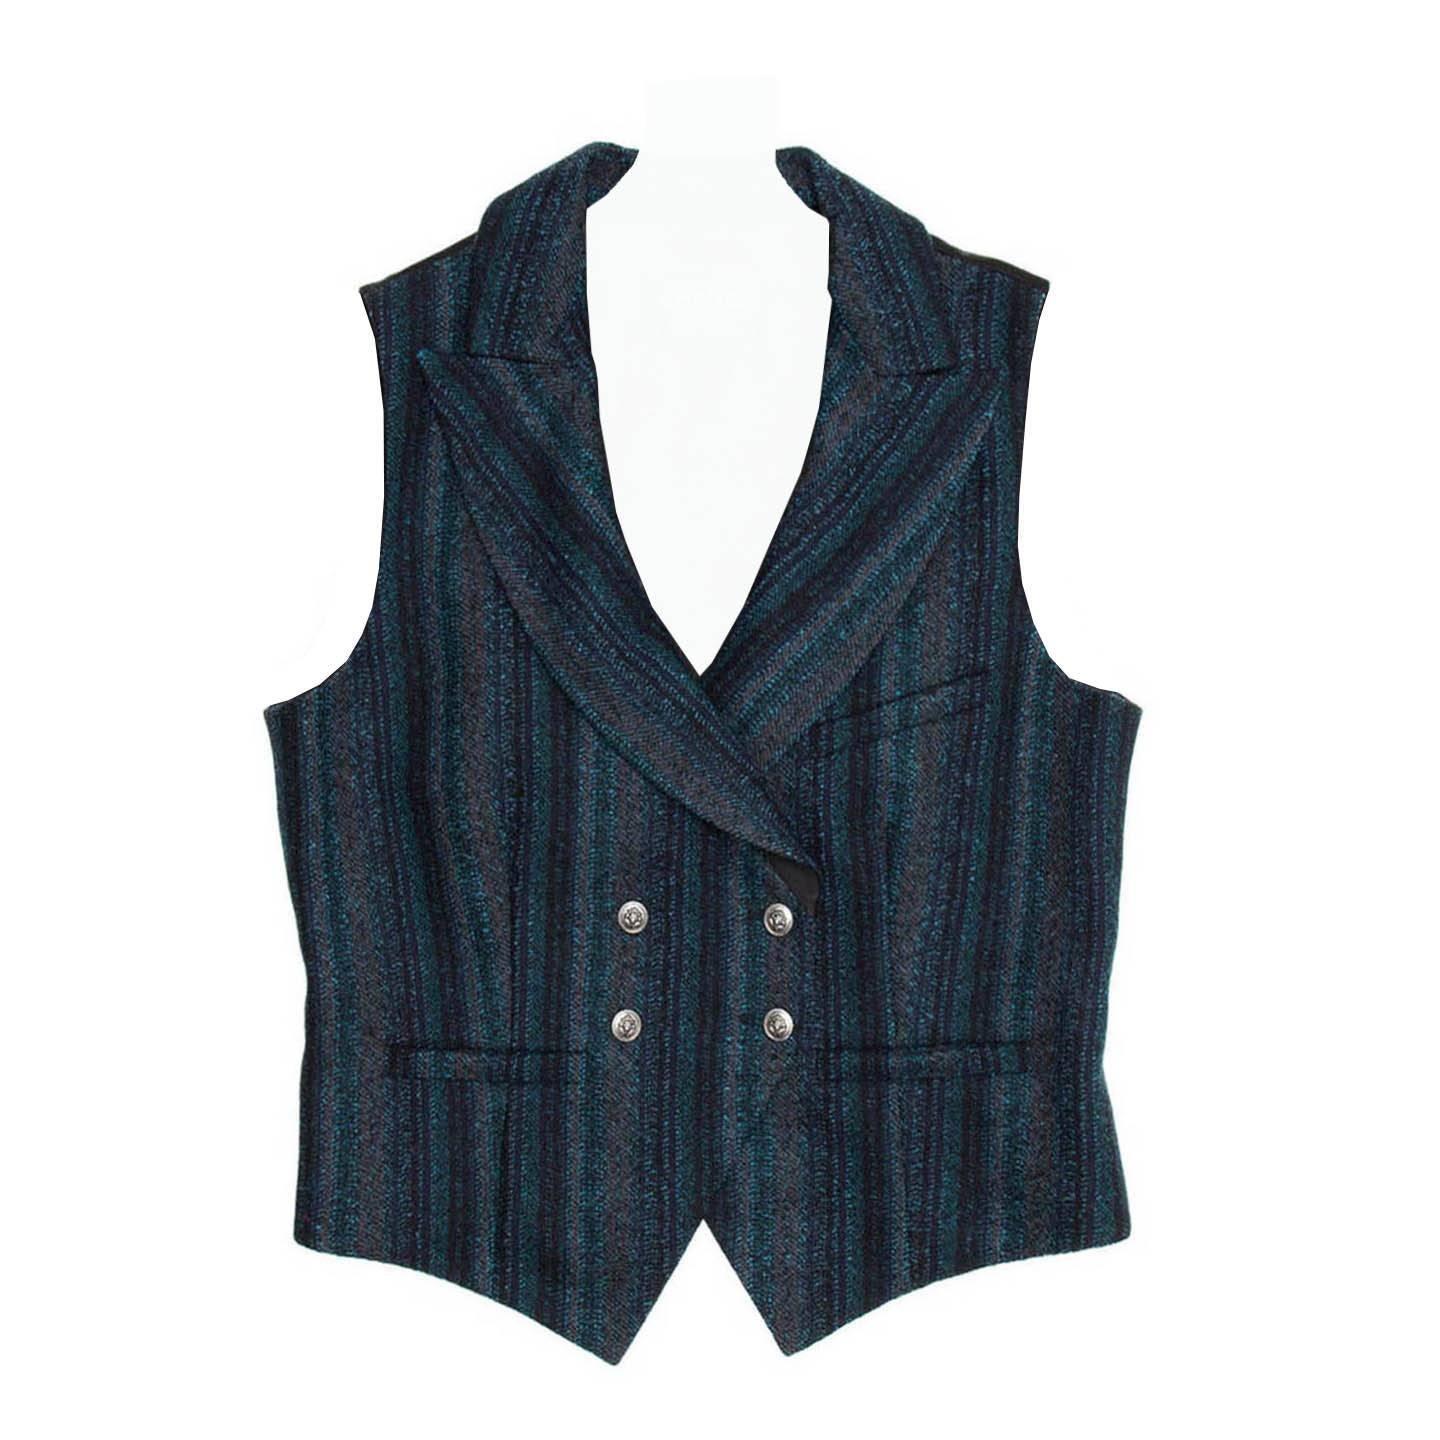 Chanel Navy Teal Gray Shades Striped Double Breasted Vest For Sale